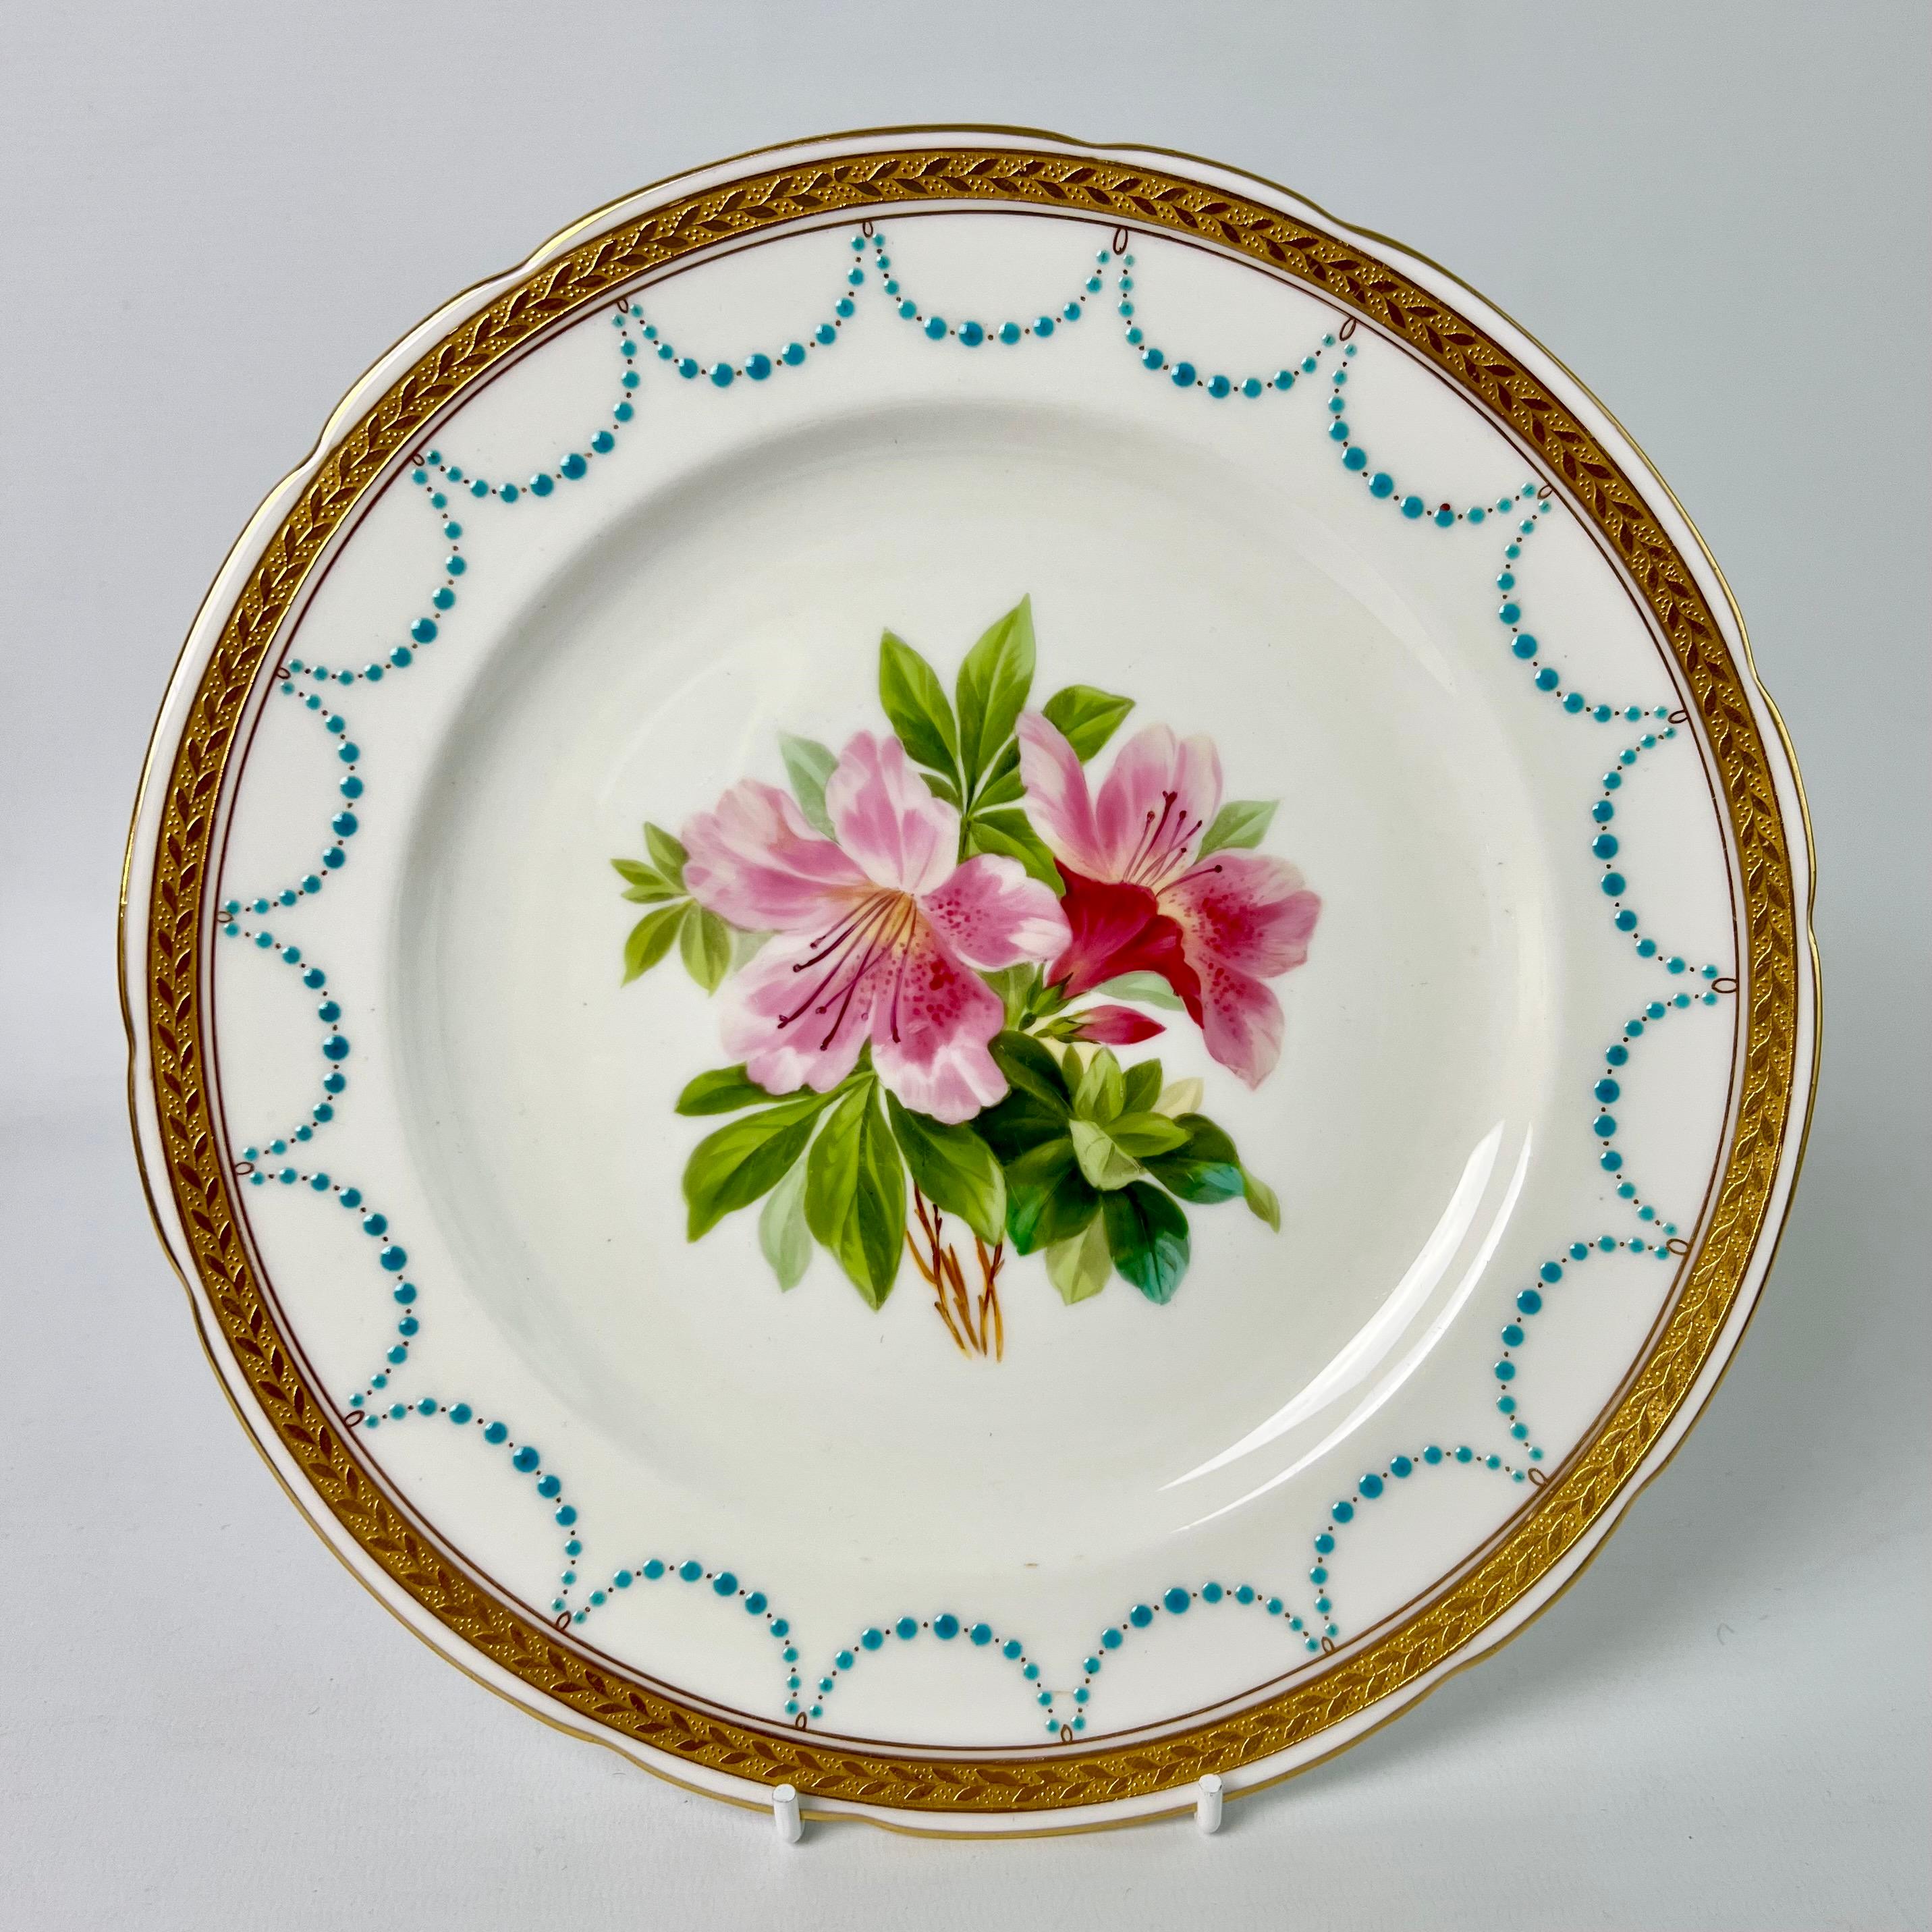 Minton Porcelain Dessert Service, Turquoise and Gilt, Flowers and Fruits, 1870 8